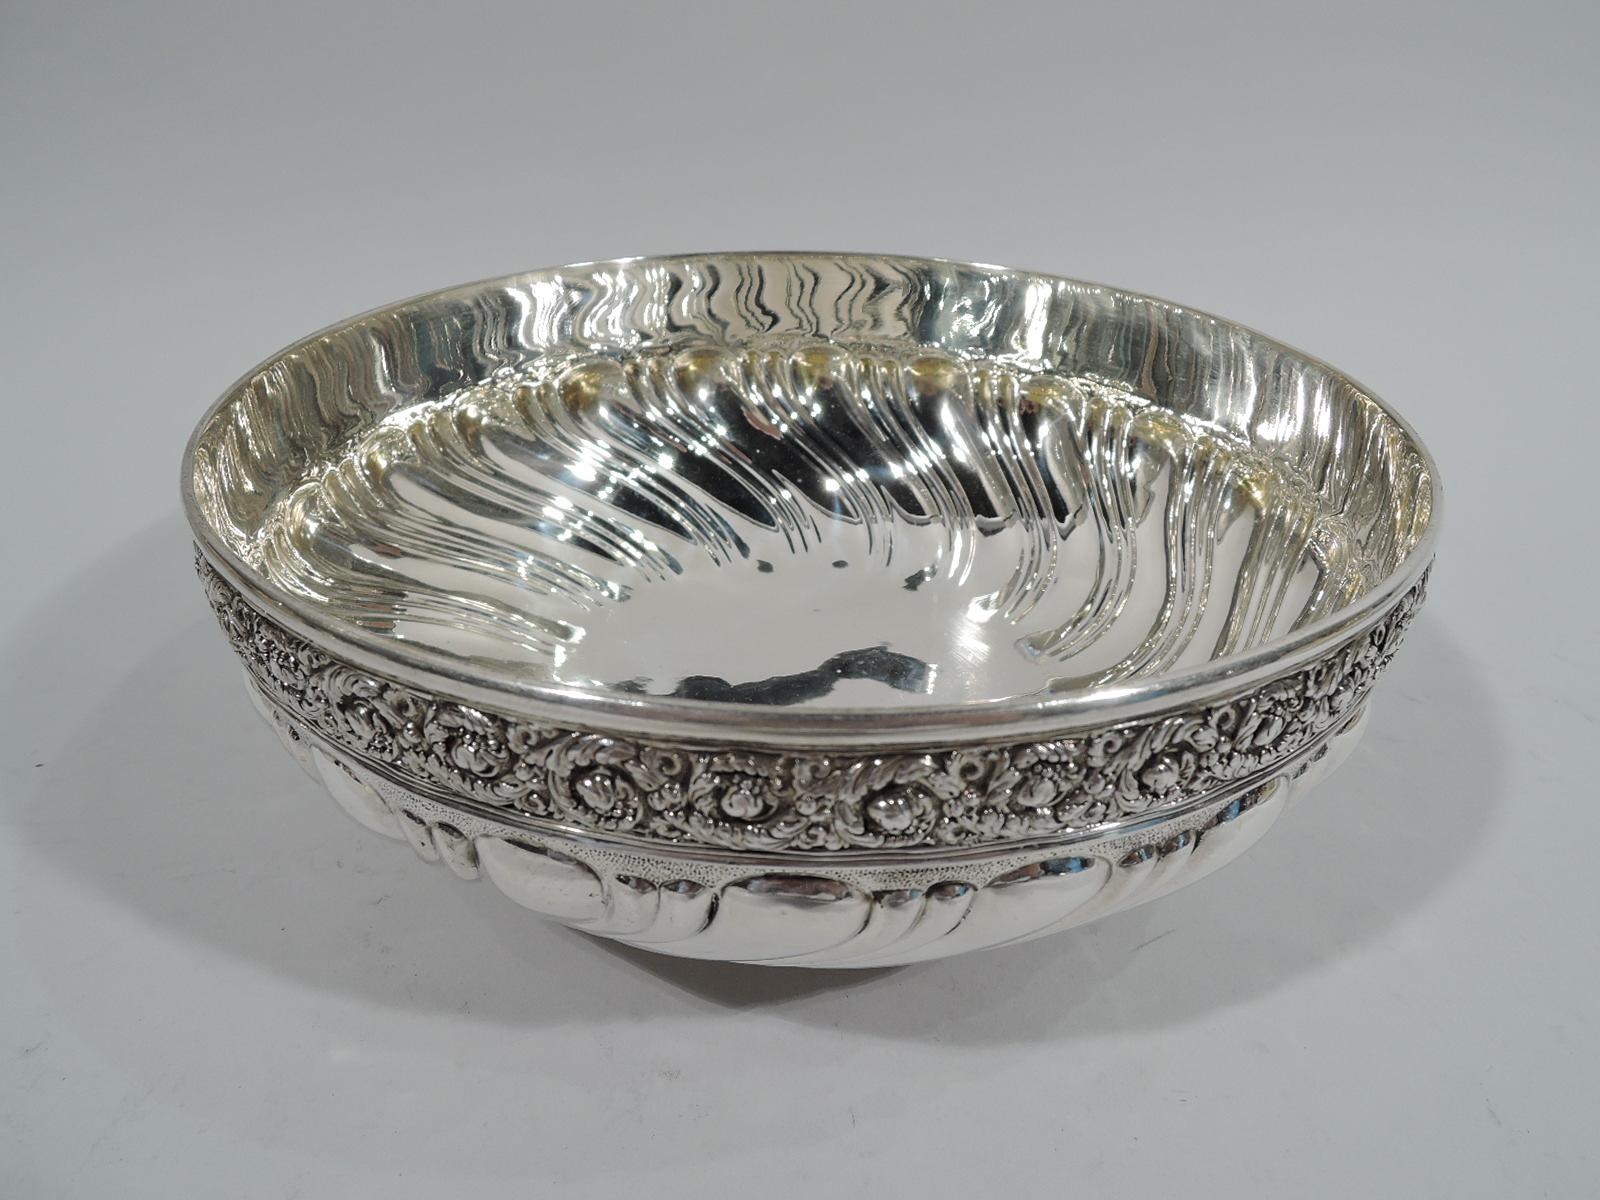 Victorian Classical sterling silver bowl. Made by Tiffany & Co. in New York. Round with curved sides and foot ring. Double narrow gadroons alternating with single wide gadroon. At rim is dense low-relief rinceaux border on stippled ground. Faint